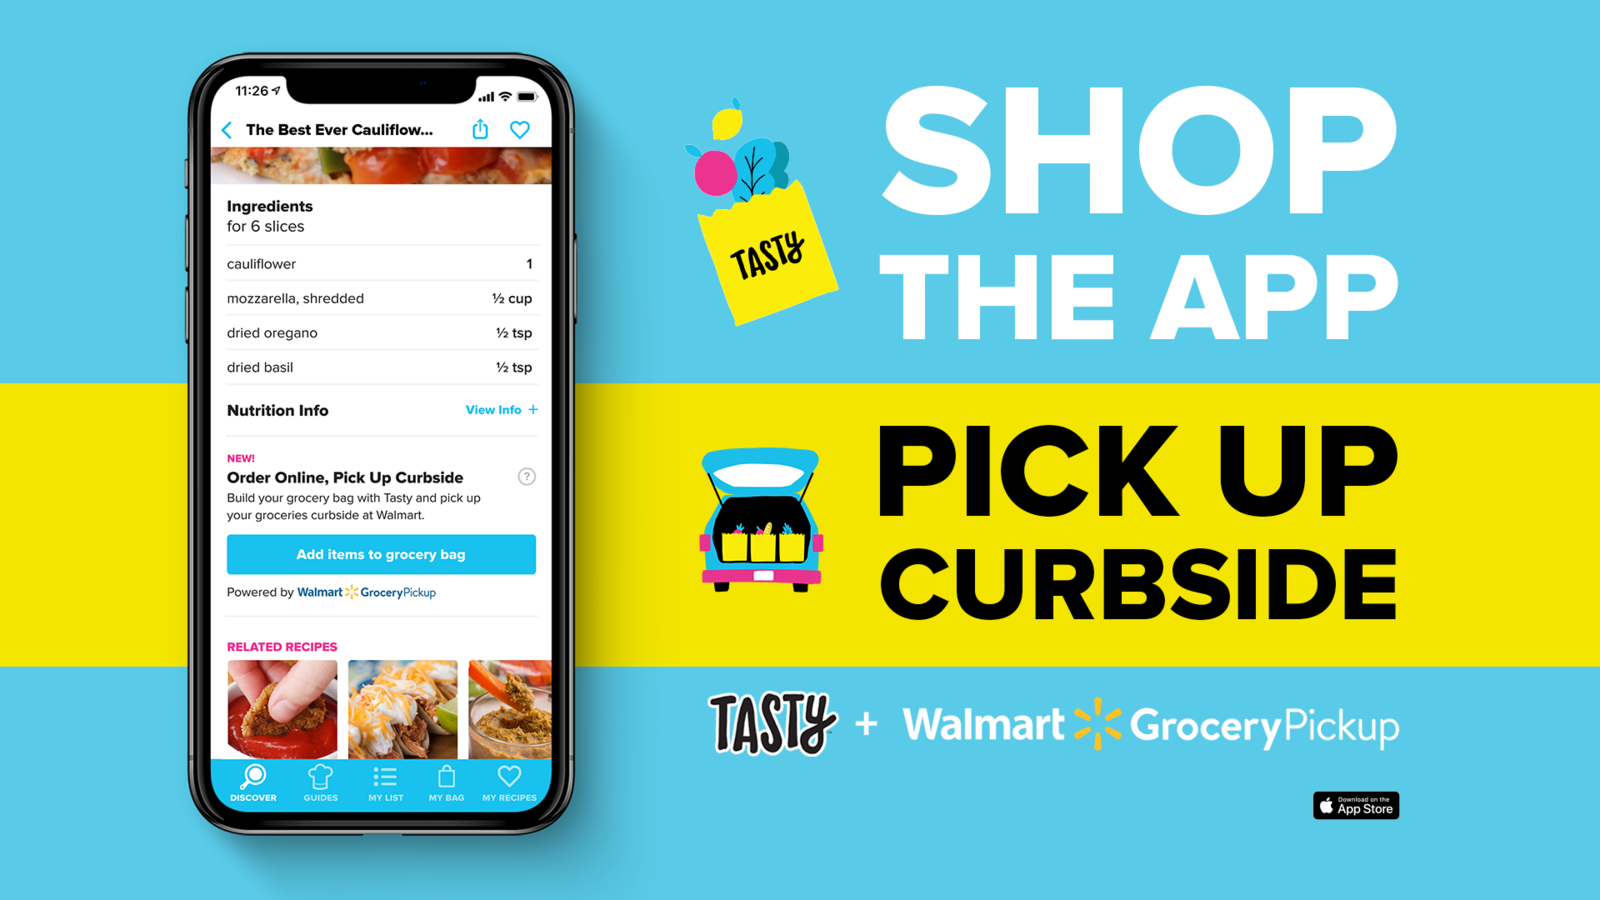 Advertisement for Tasty app partnership with Walmart for curbside grocery pickup, featuring a recipe on a smartphone